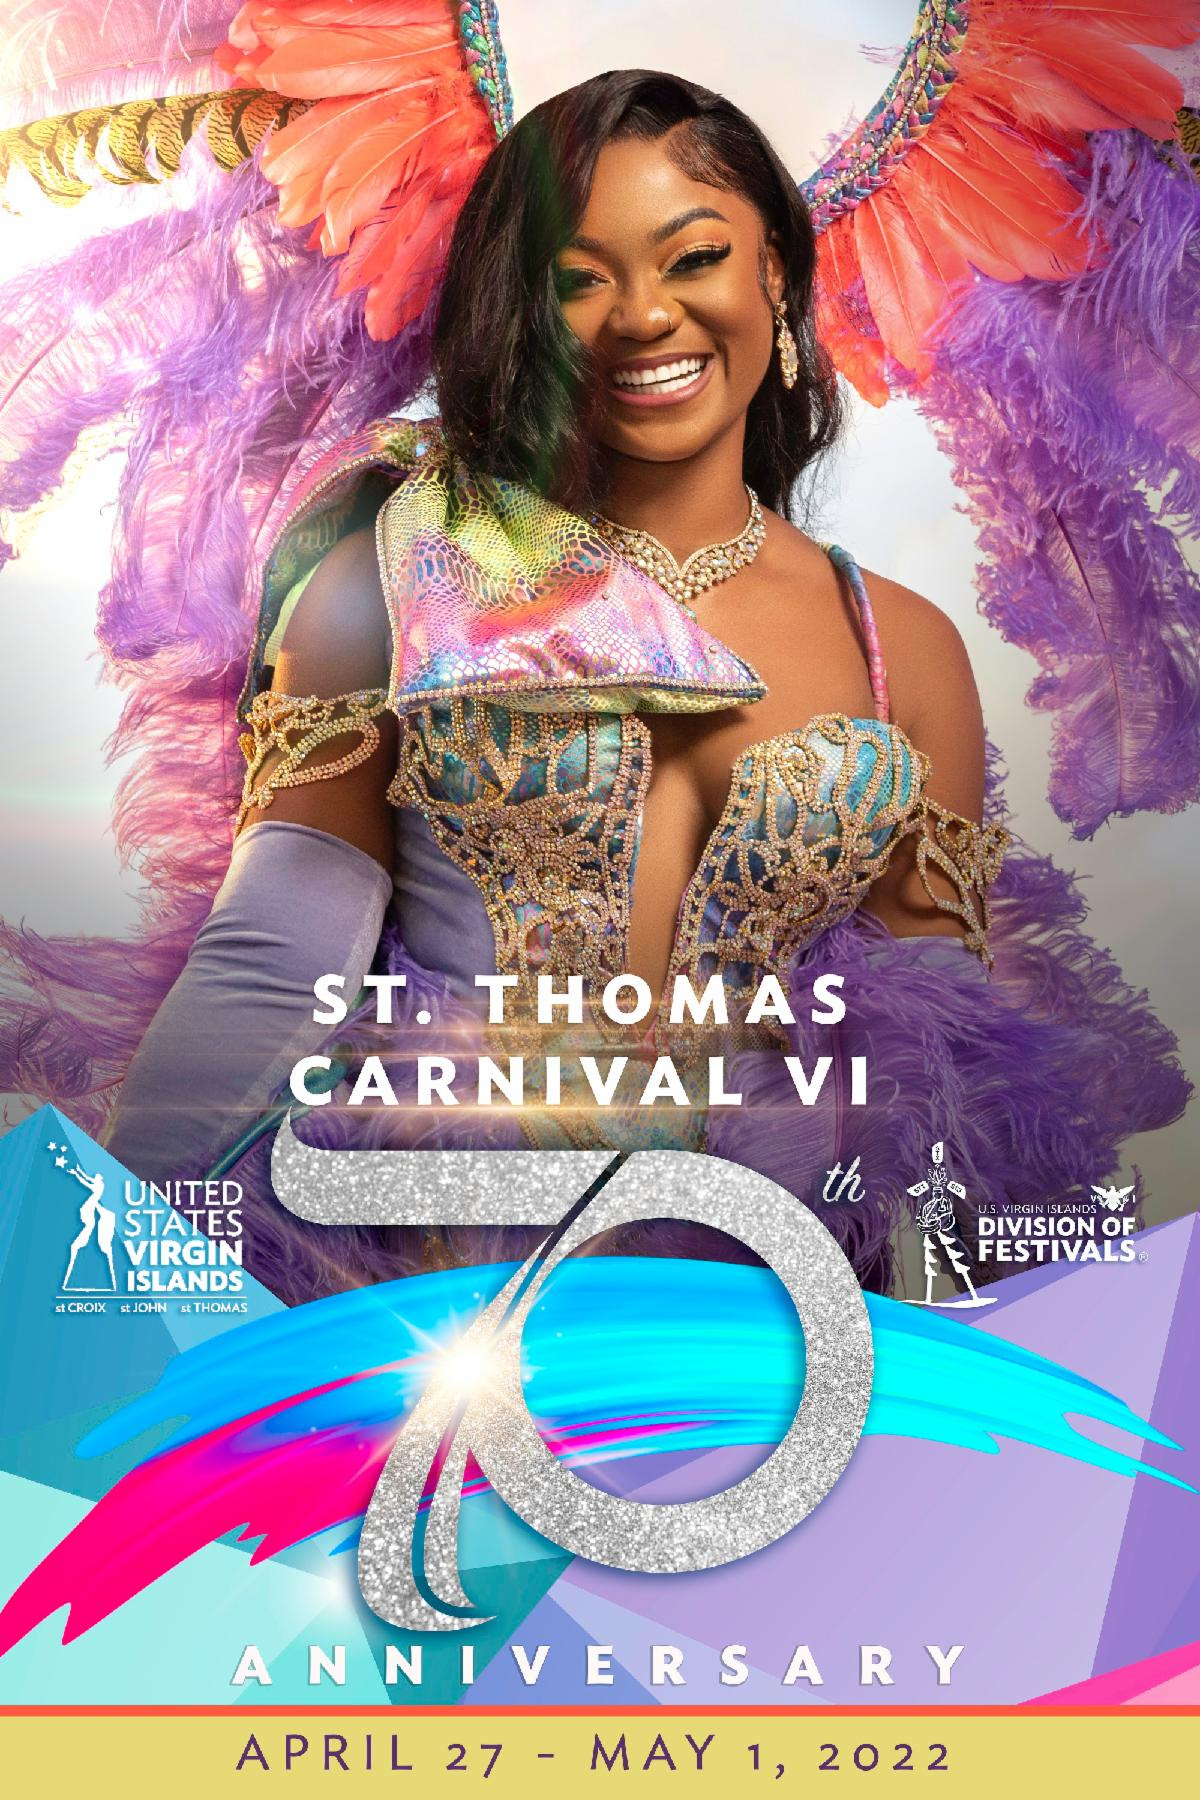 St. Thomas to Celebrate 70 Years of Carnival in the Virgin Islands St